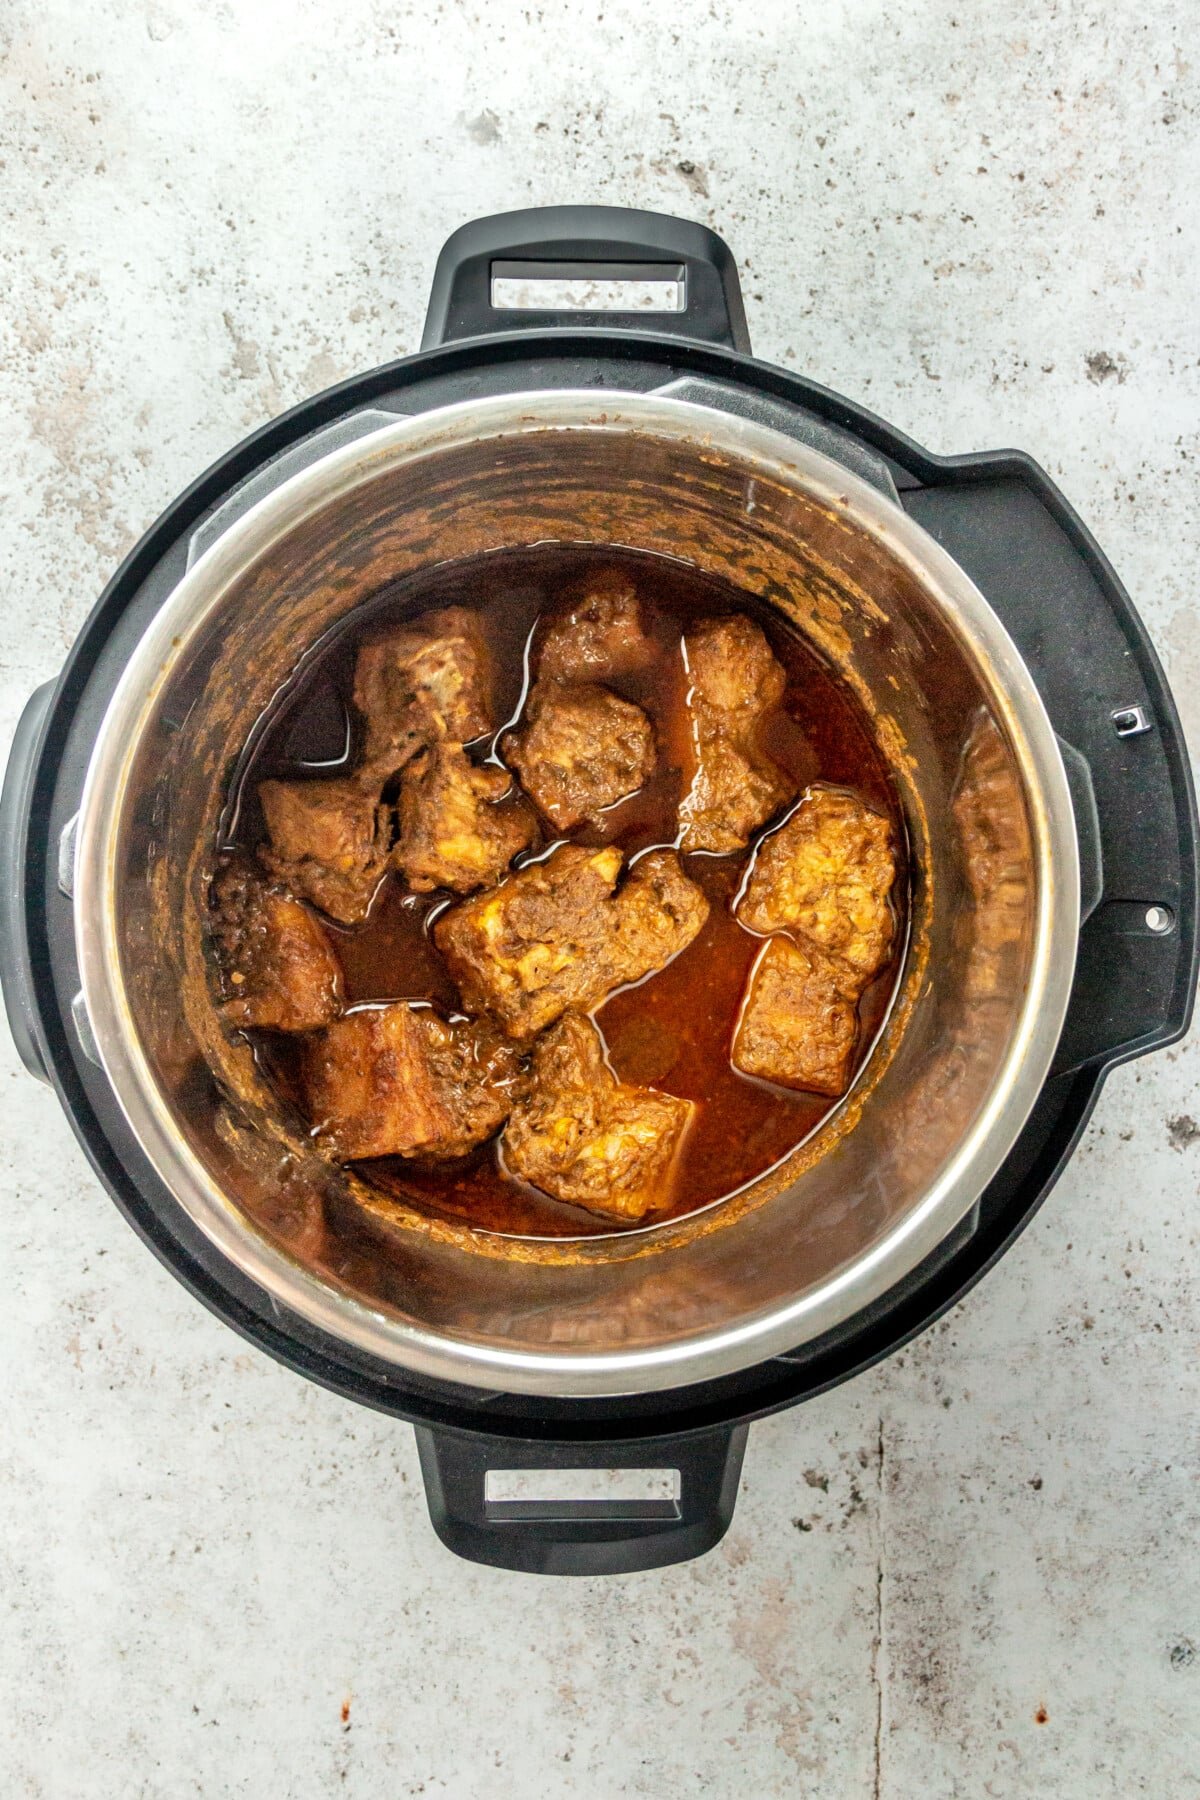 Cooked chunks of marinated pork shoulder sit in an instant pot on a light grey surface.